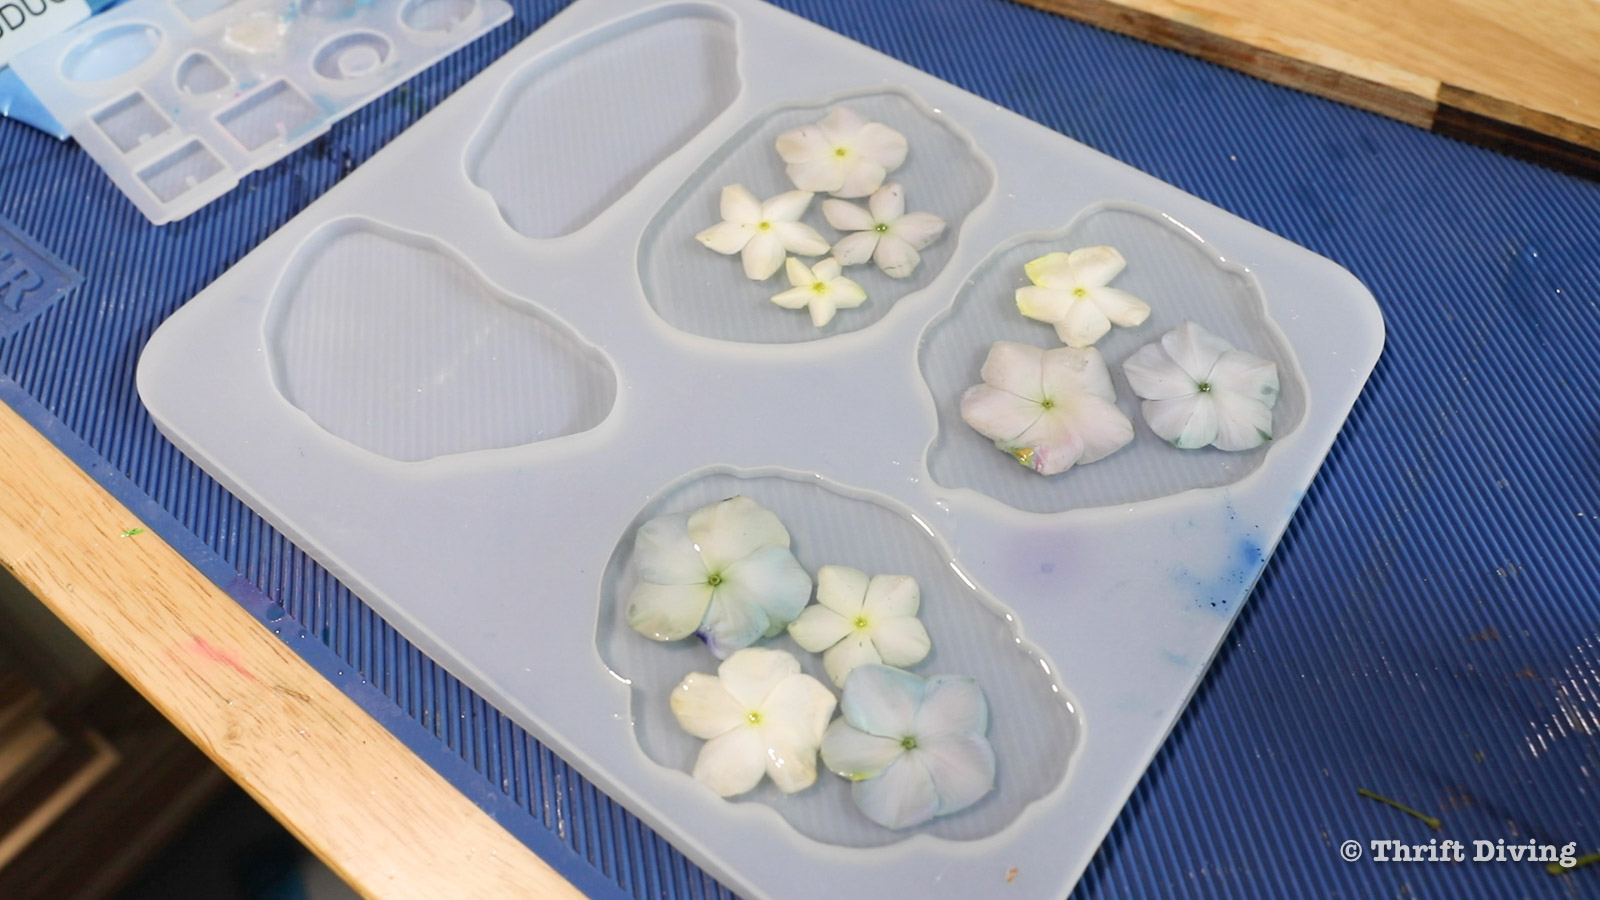 Making epoxy flower art drink coasters - Epoxy will bleach out fresh flowers - Thrift Diving